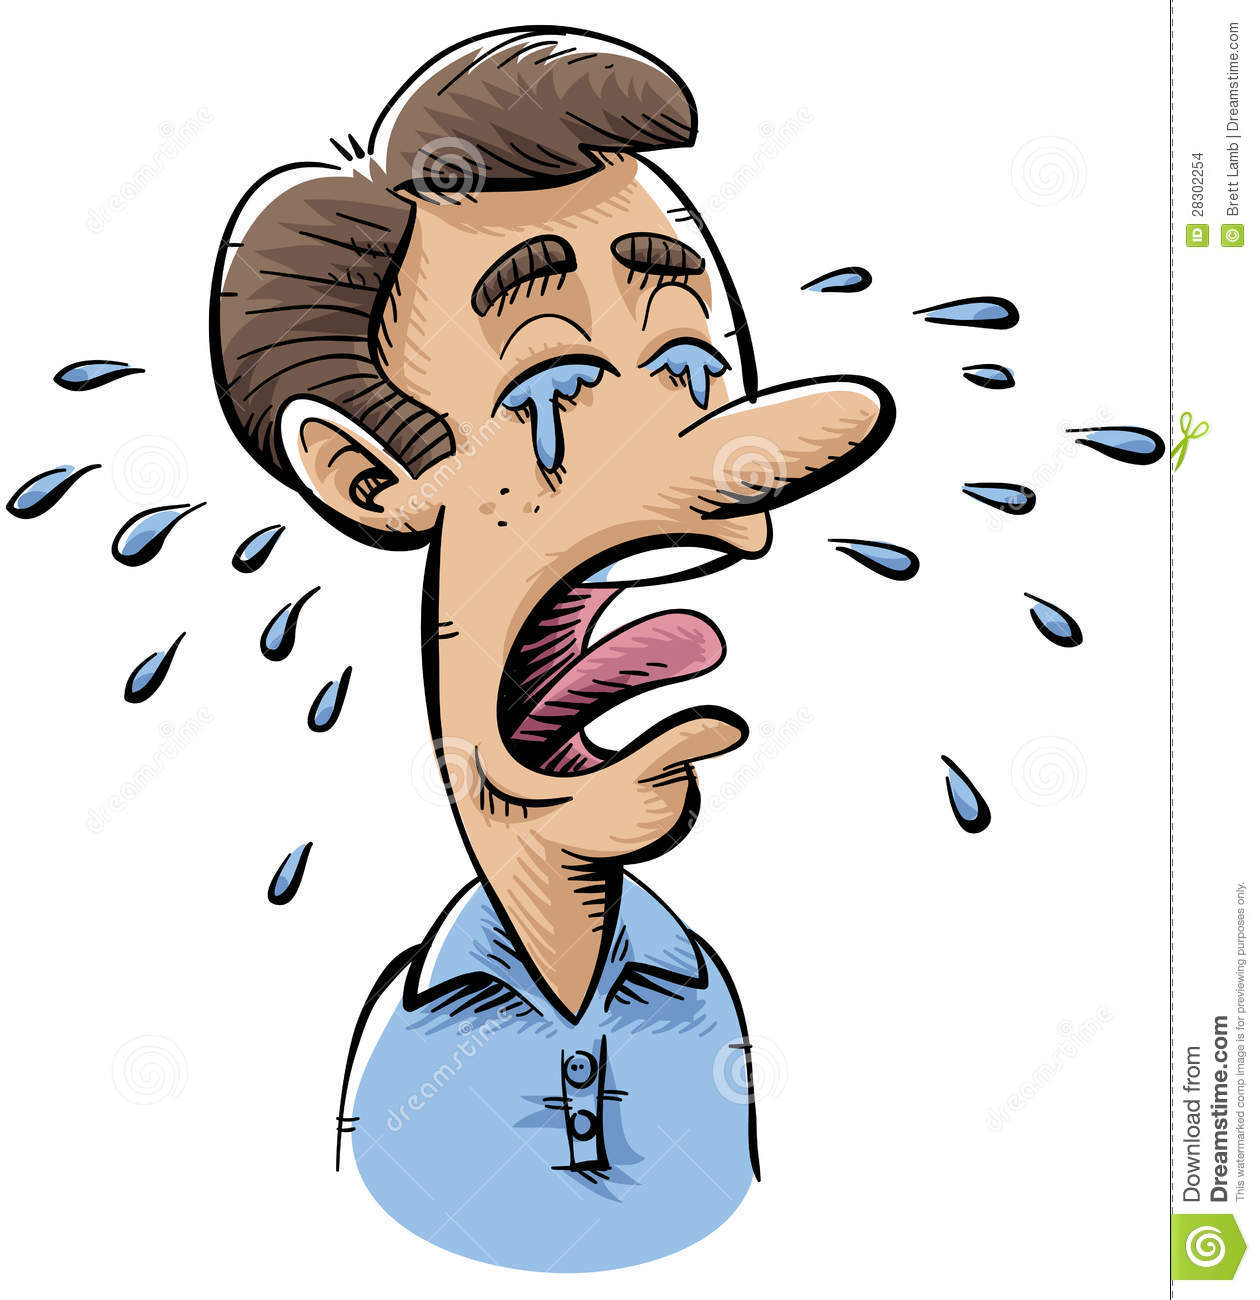 Crying Man Stock Images   Image  28302254